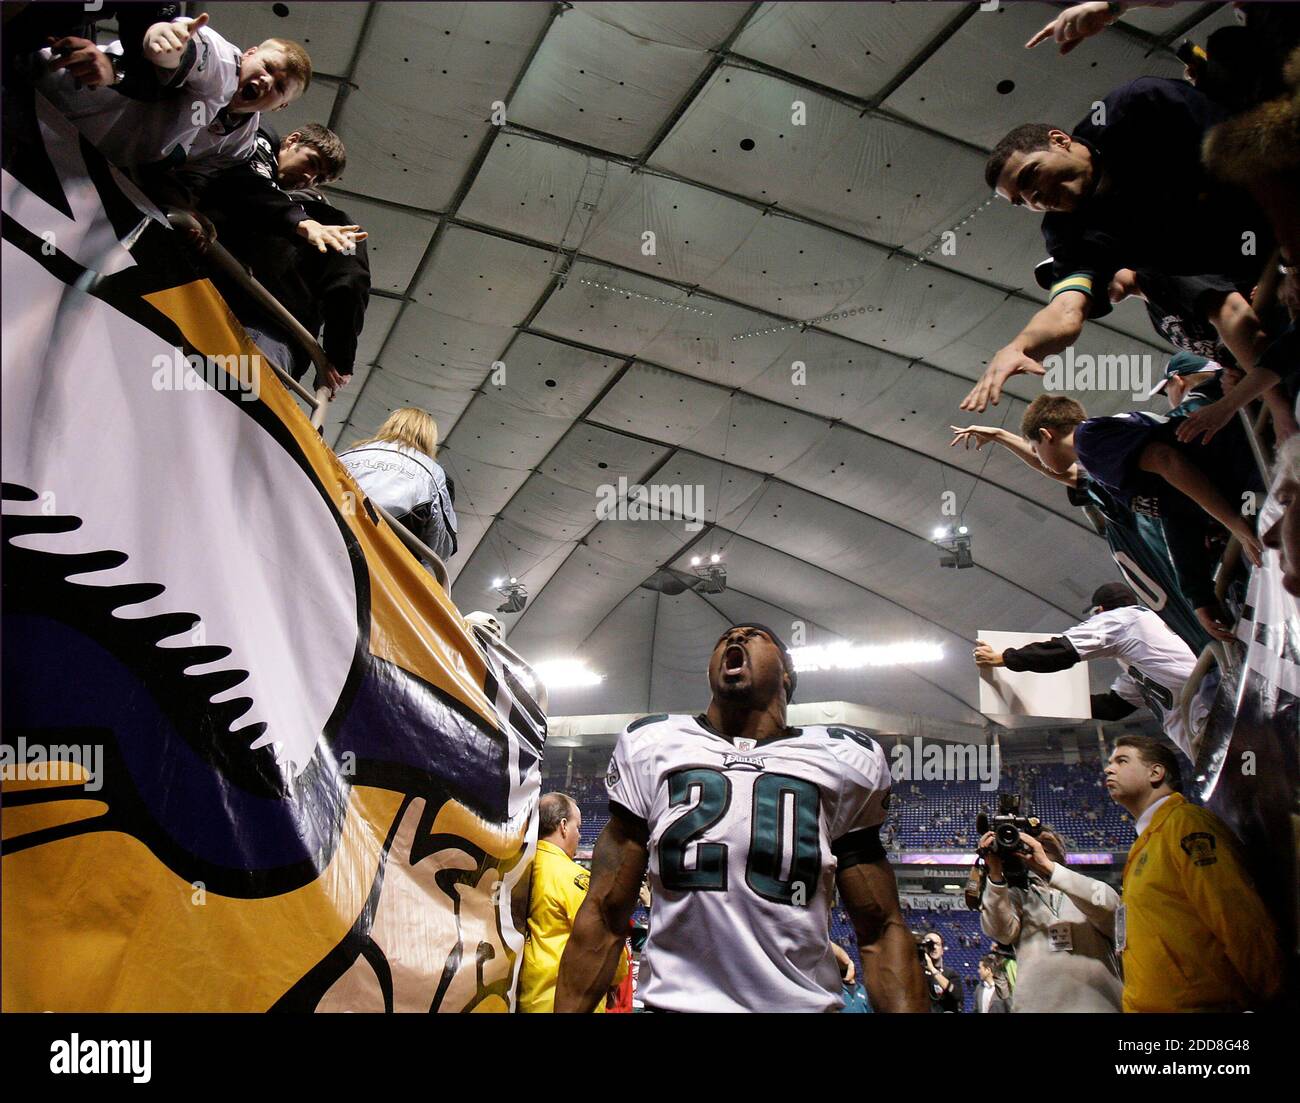 NO FILM, NO VIDEO, NO TV, NO DOCUMENTARY - Philadlephia Eagles Brian Dawkins reacts to the fans after the Eagles beat the Minnesota Vikings. The Eagles defeated the Vikings 26-14 in the first round of the NFC playoffs at the Metrodome in Minneapolis, MN, USA on January 4, 2009. Photo by David Maialetti/Philadelphia Daily News/MCT/Cameleon/ABACAPRESS.COM Stock Photo